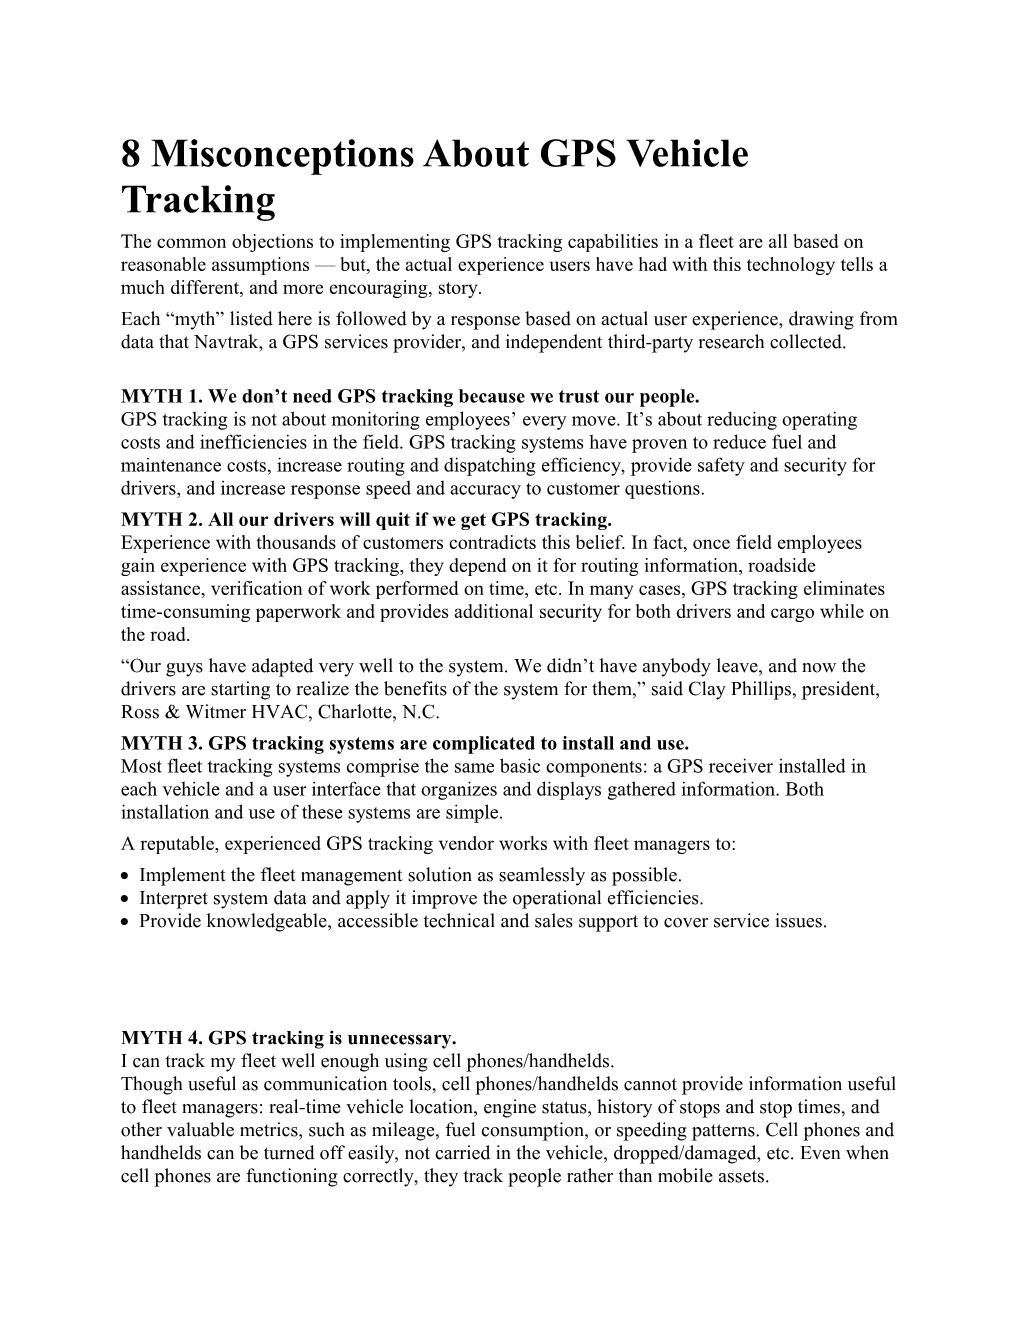 8 Misconceptions About GPS Vehicle Tracking